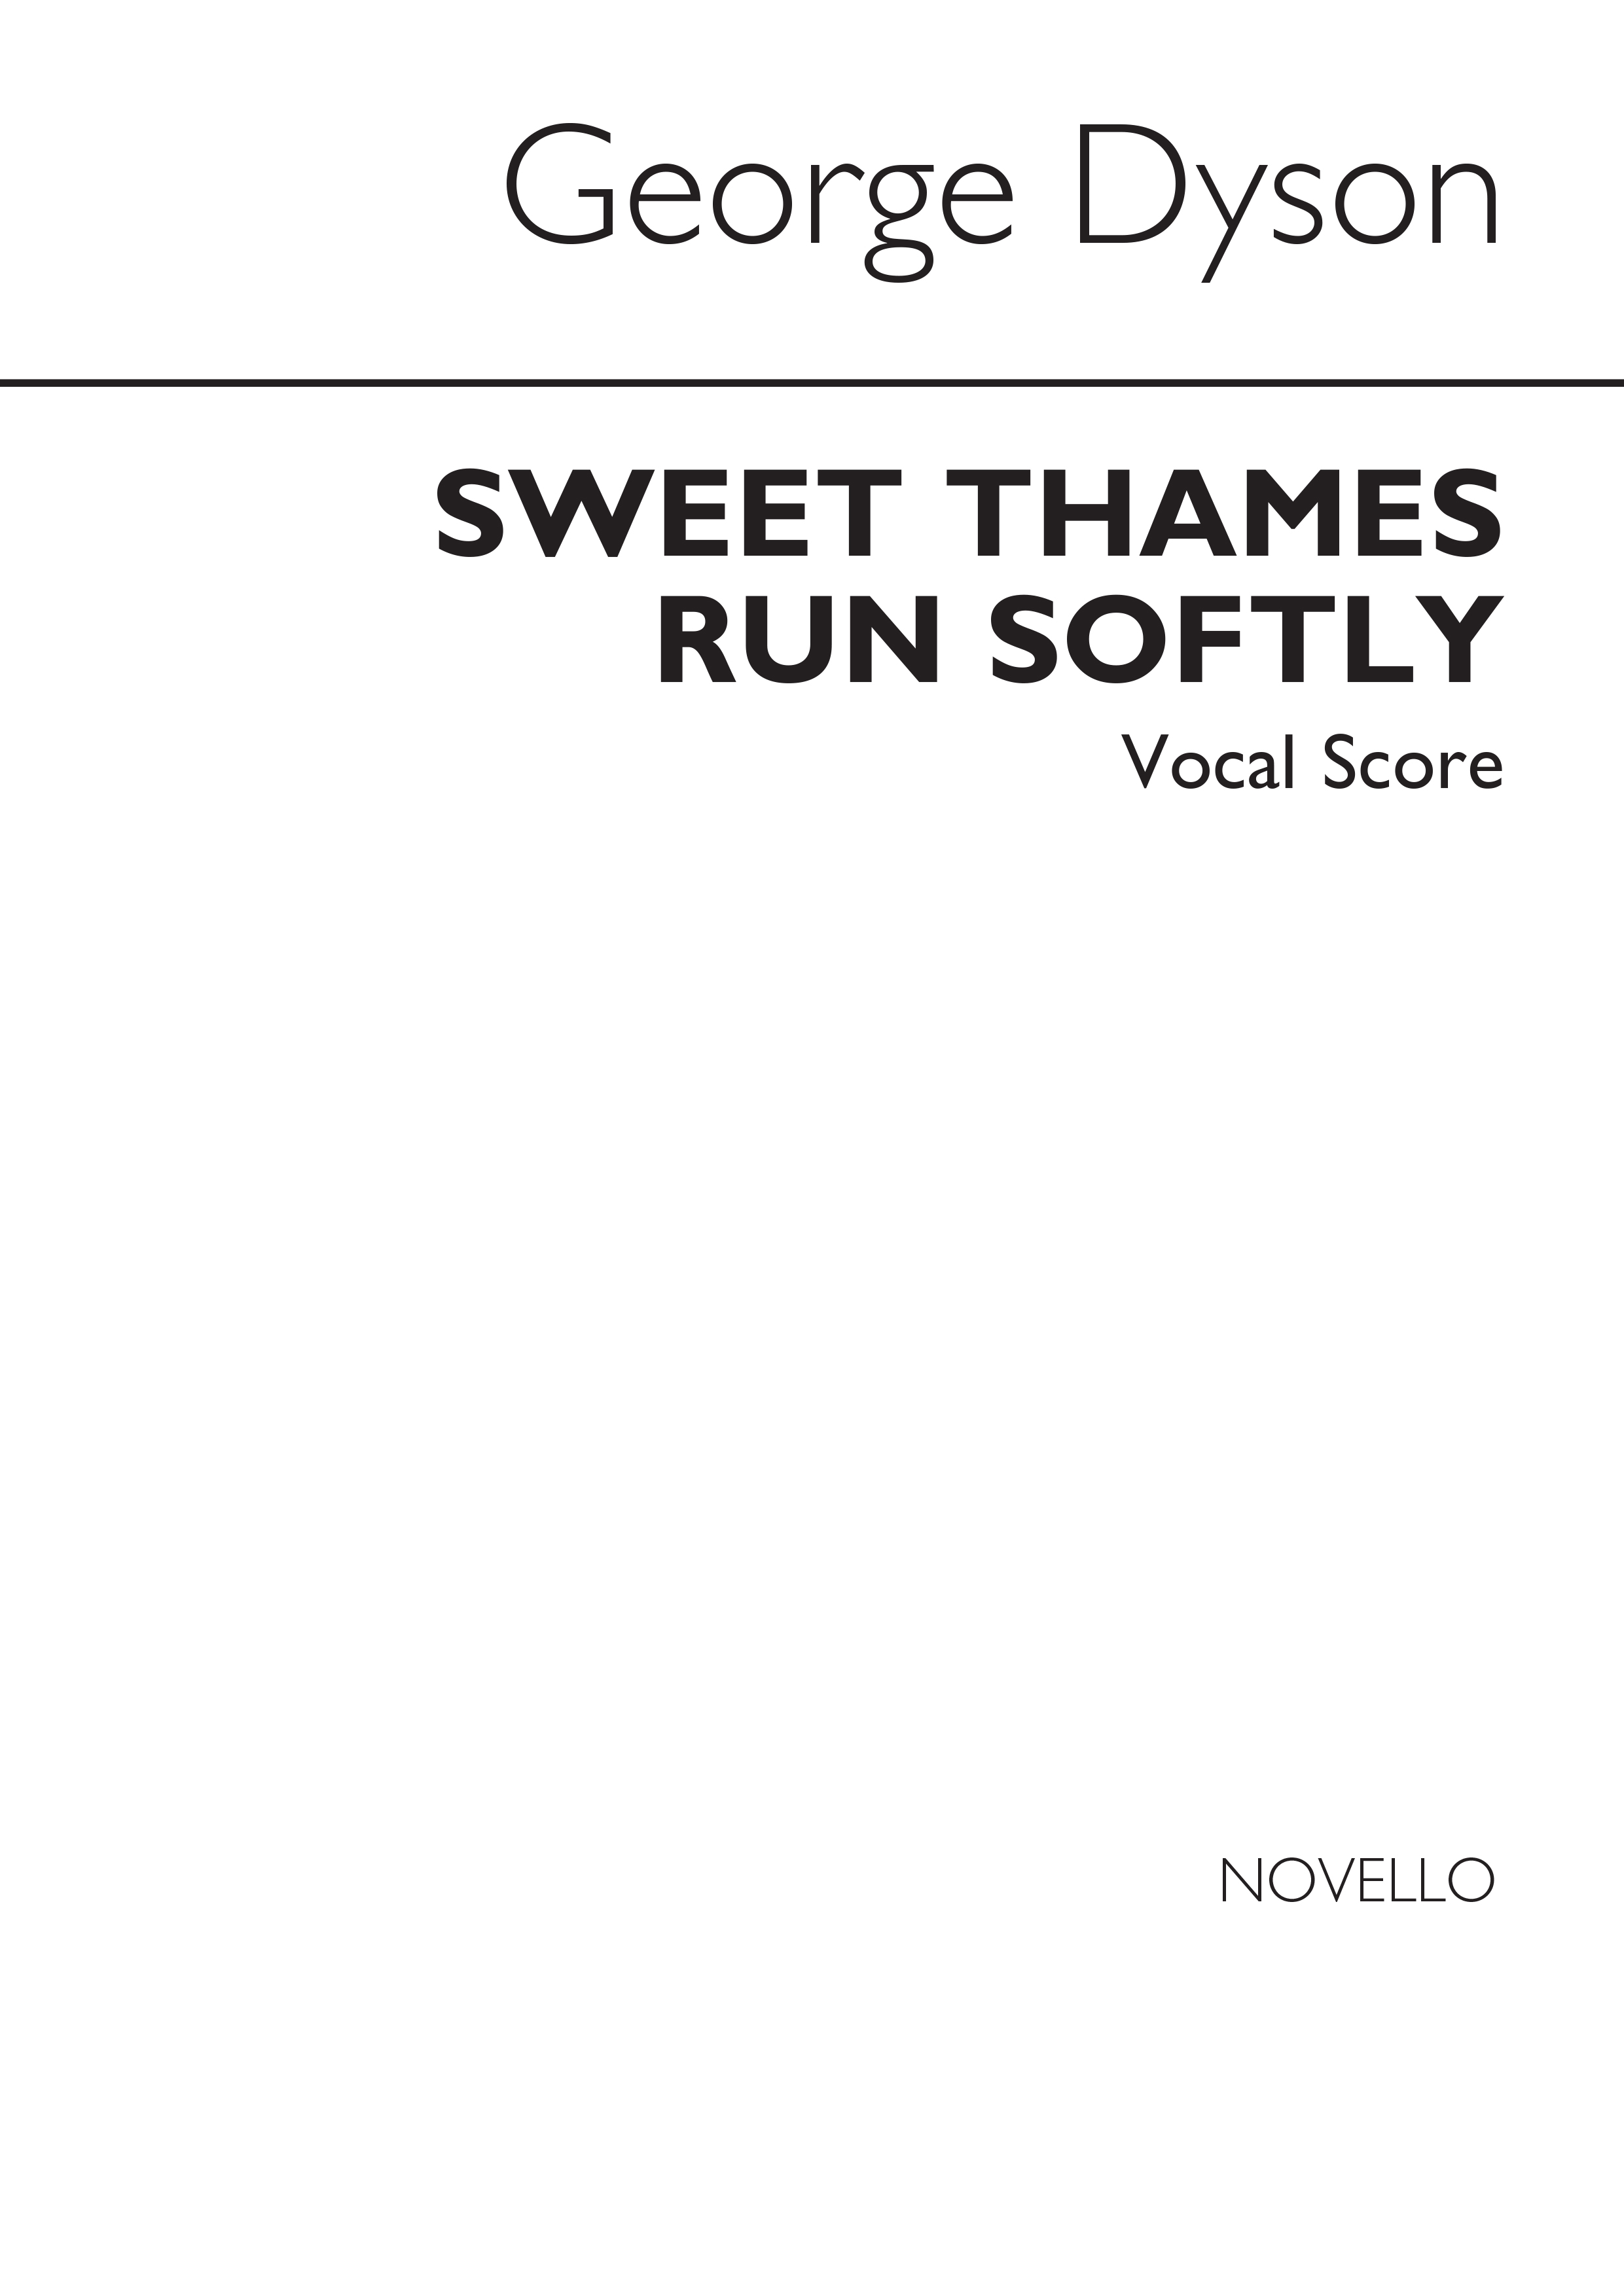 George Dyson: Sweet Thames Run Softly (Vocal Score)